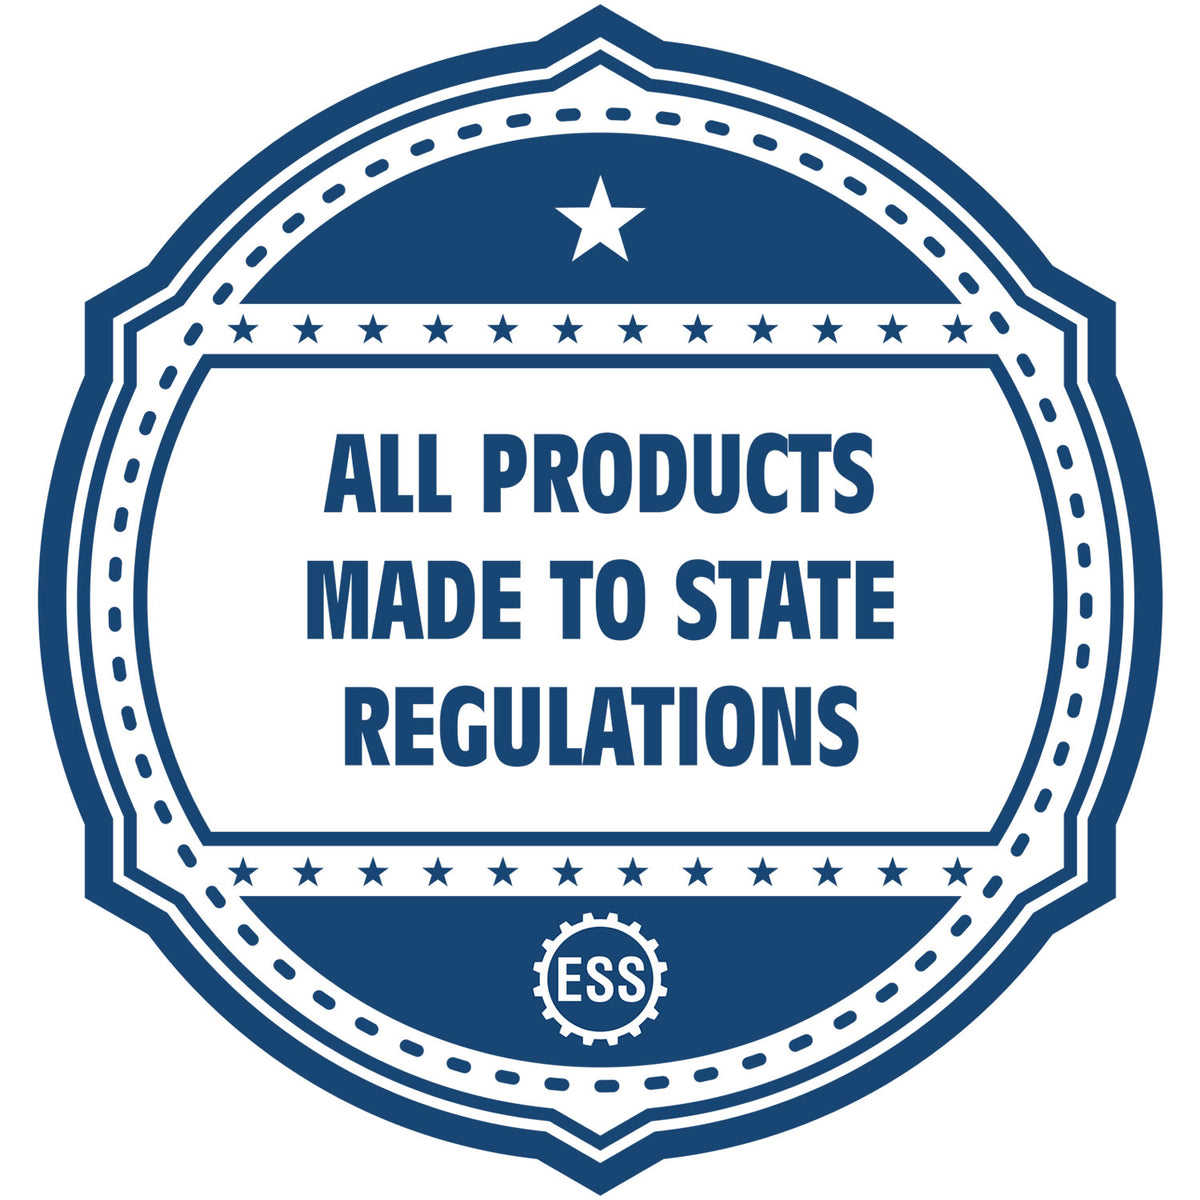 An icon or badge element for the Slim Pre-Inked Rhode Island Professional Engineer Seal Stamp showing that this product is made in compliance with state regulations.